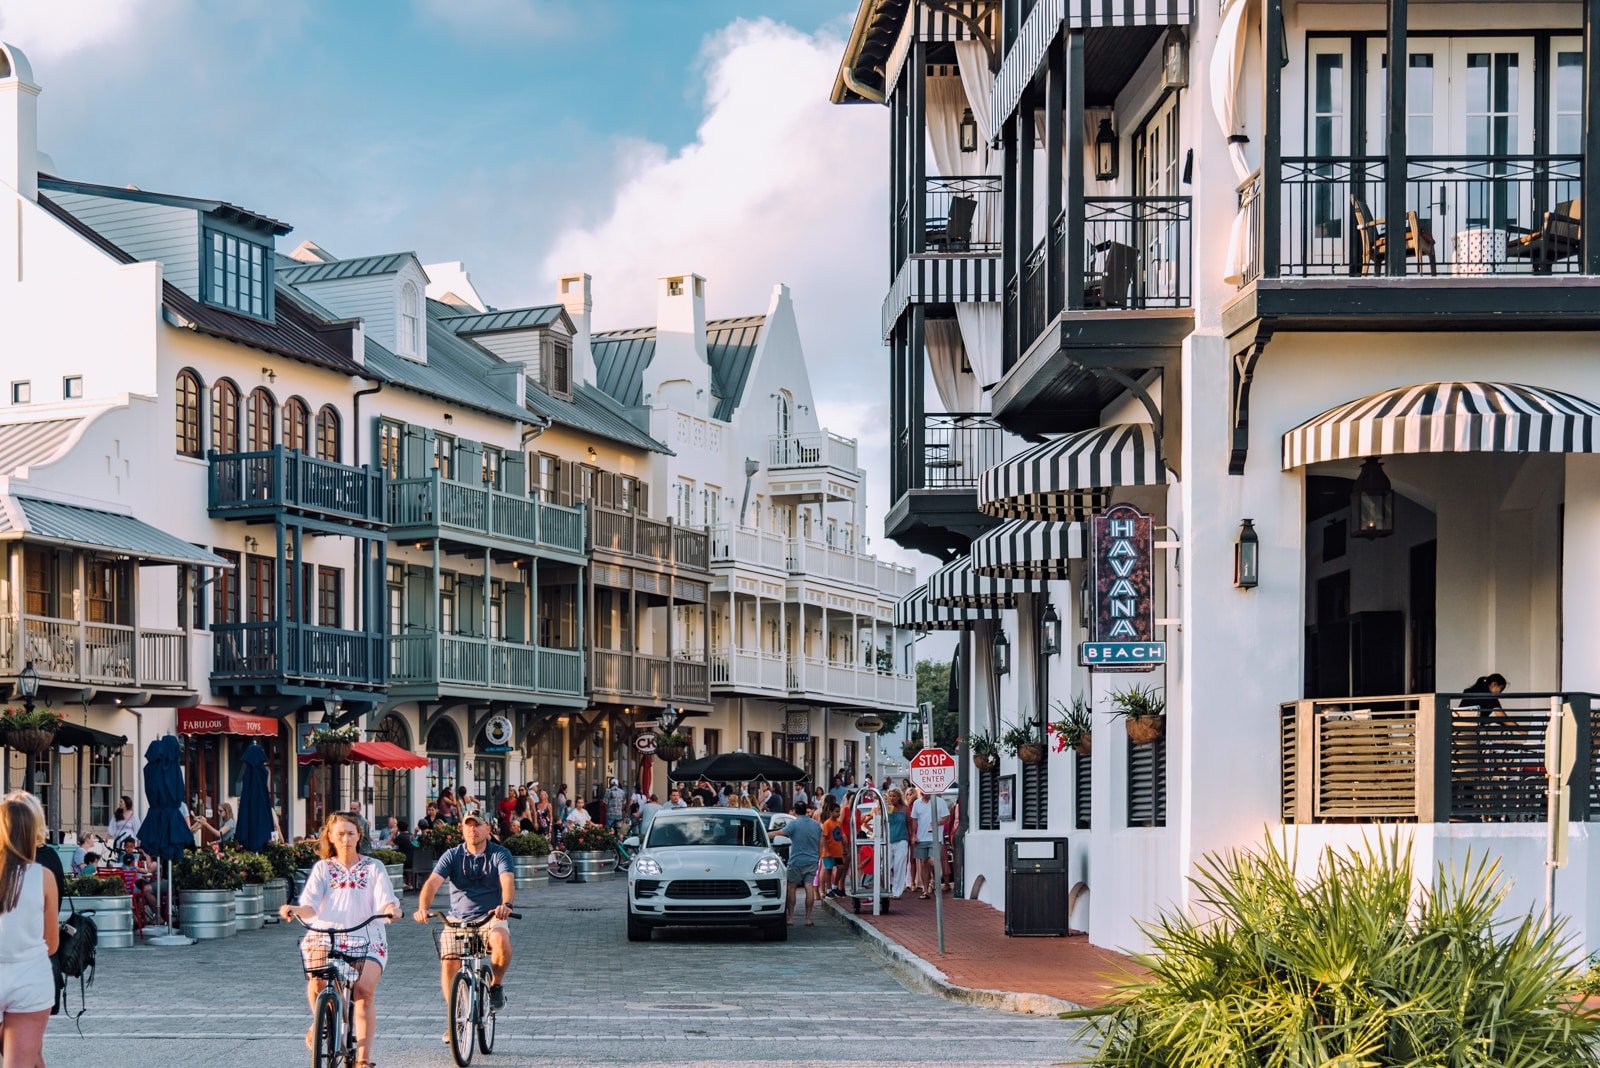 39 Things to Do in Rosemary Beach, Florida in 2023